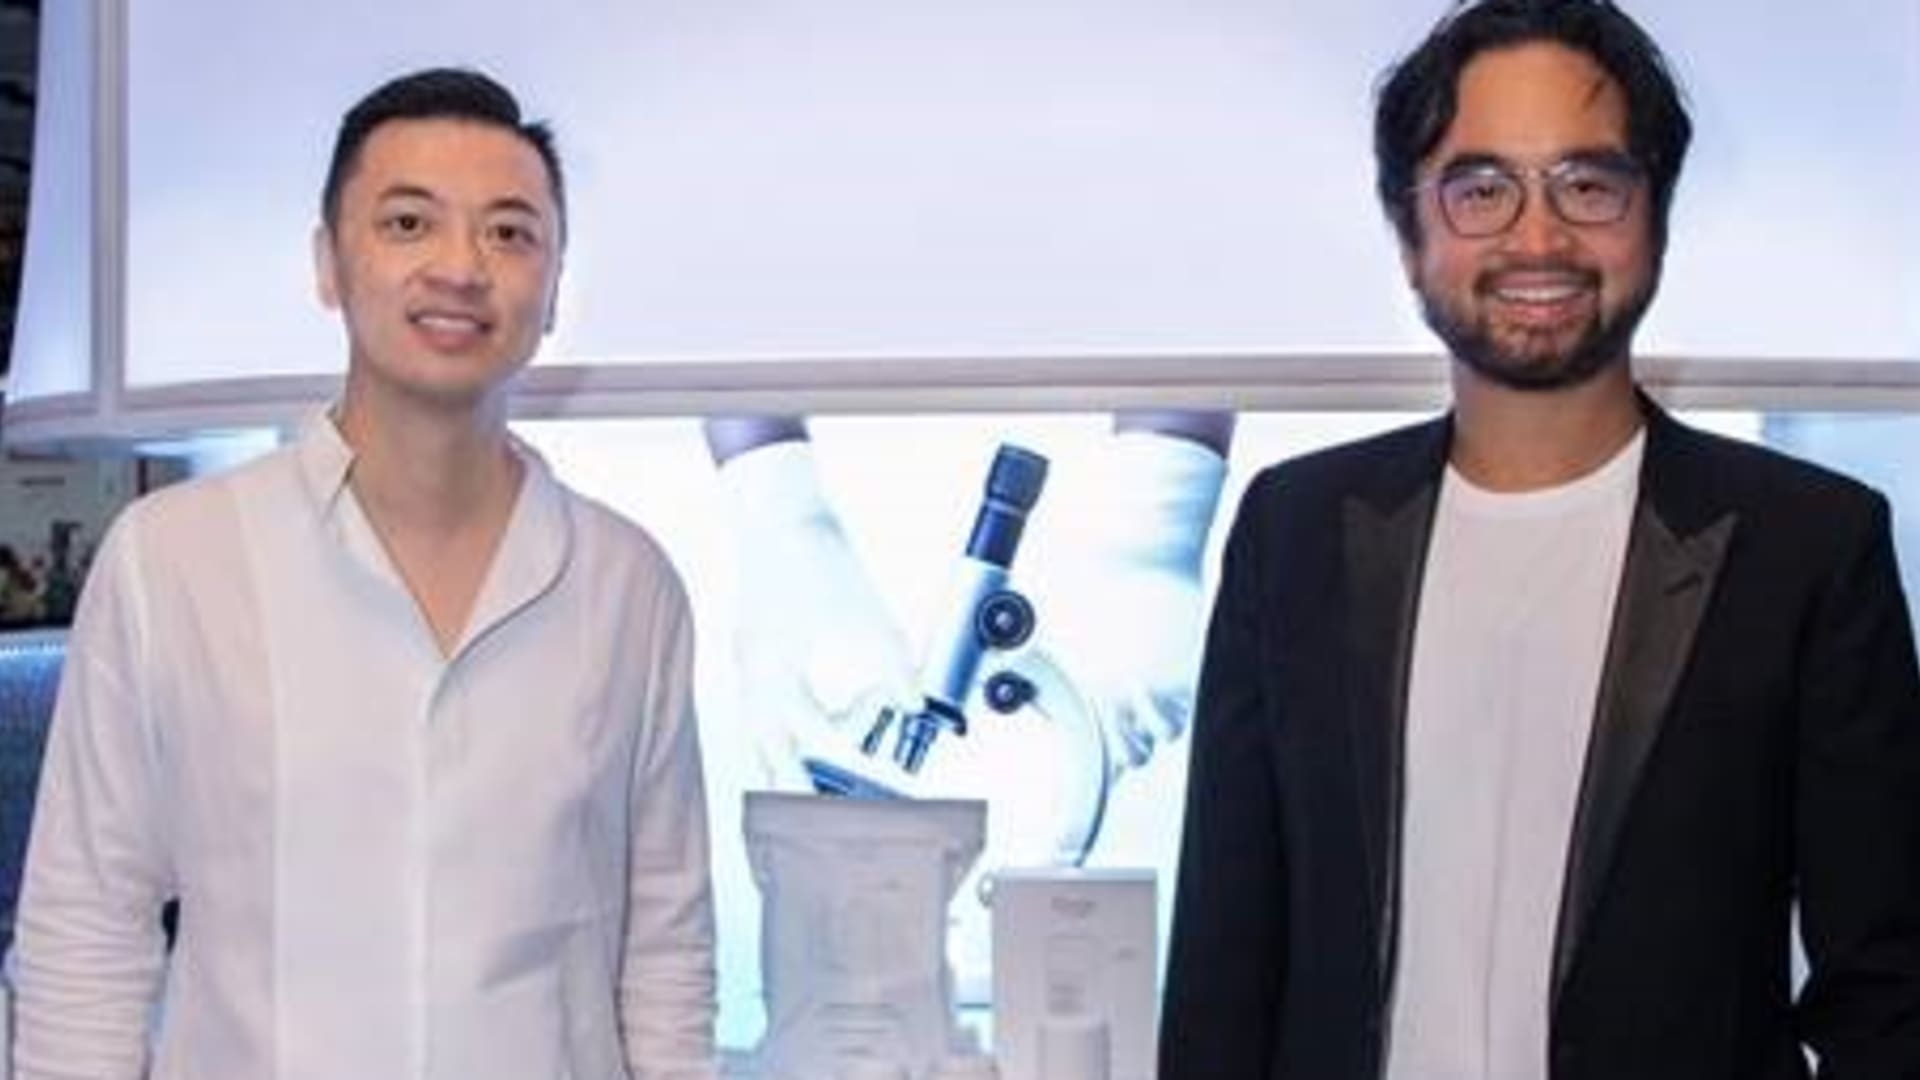 Prenetics CEO Danny Yeung (left) and Artisan Acquisition's founder Adrian Cheng, who is also CEO and Executive Vice Chairman of New World Development. Prenetics is going public through a SPAC merger with Artisan Acquisition that will value the combined entity at $1.7 billion.